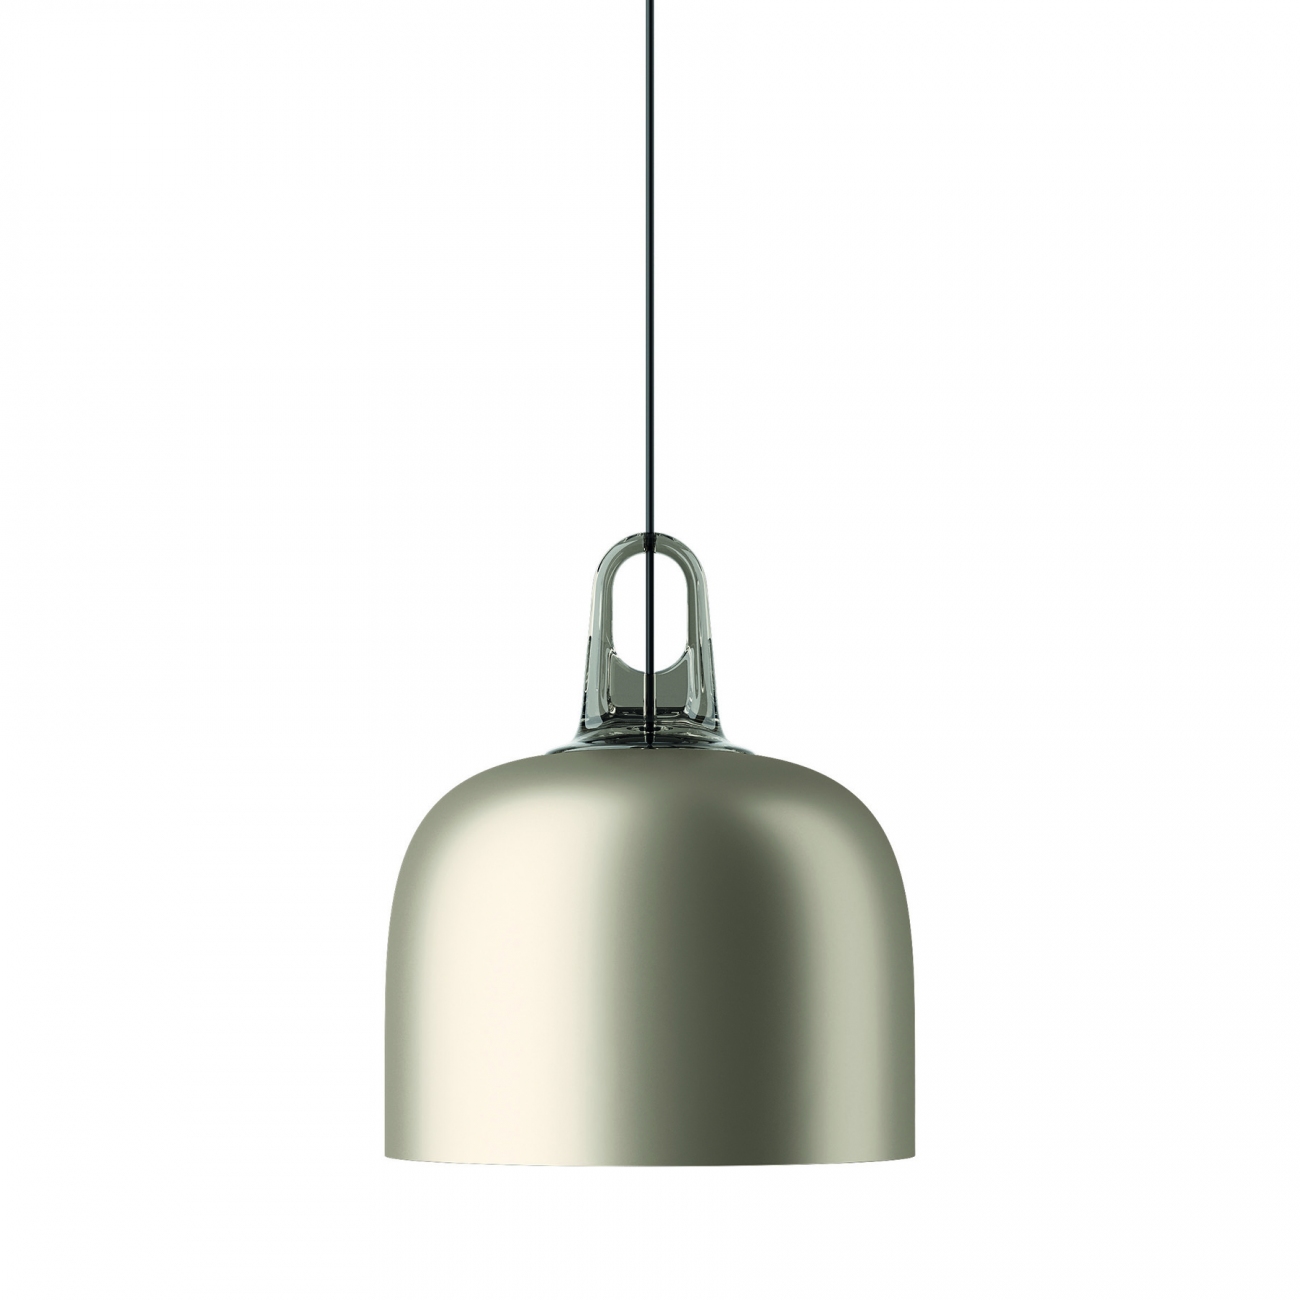 Lodes Bell Cone cluster pendant lamp